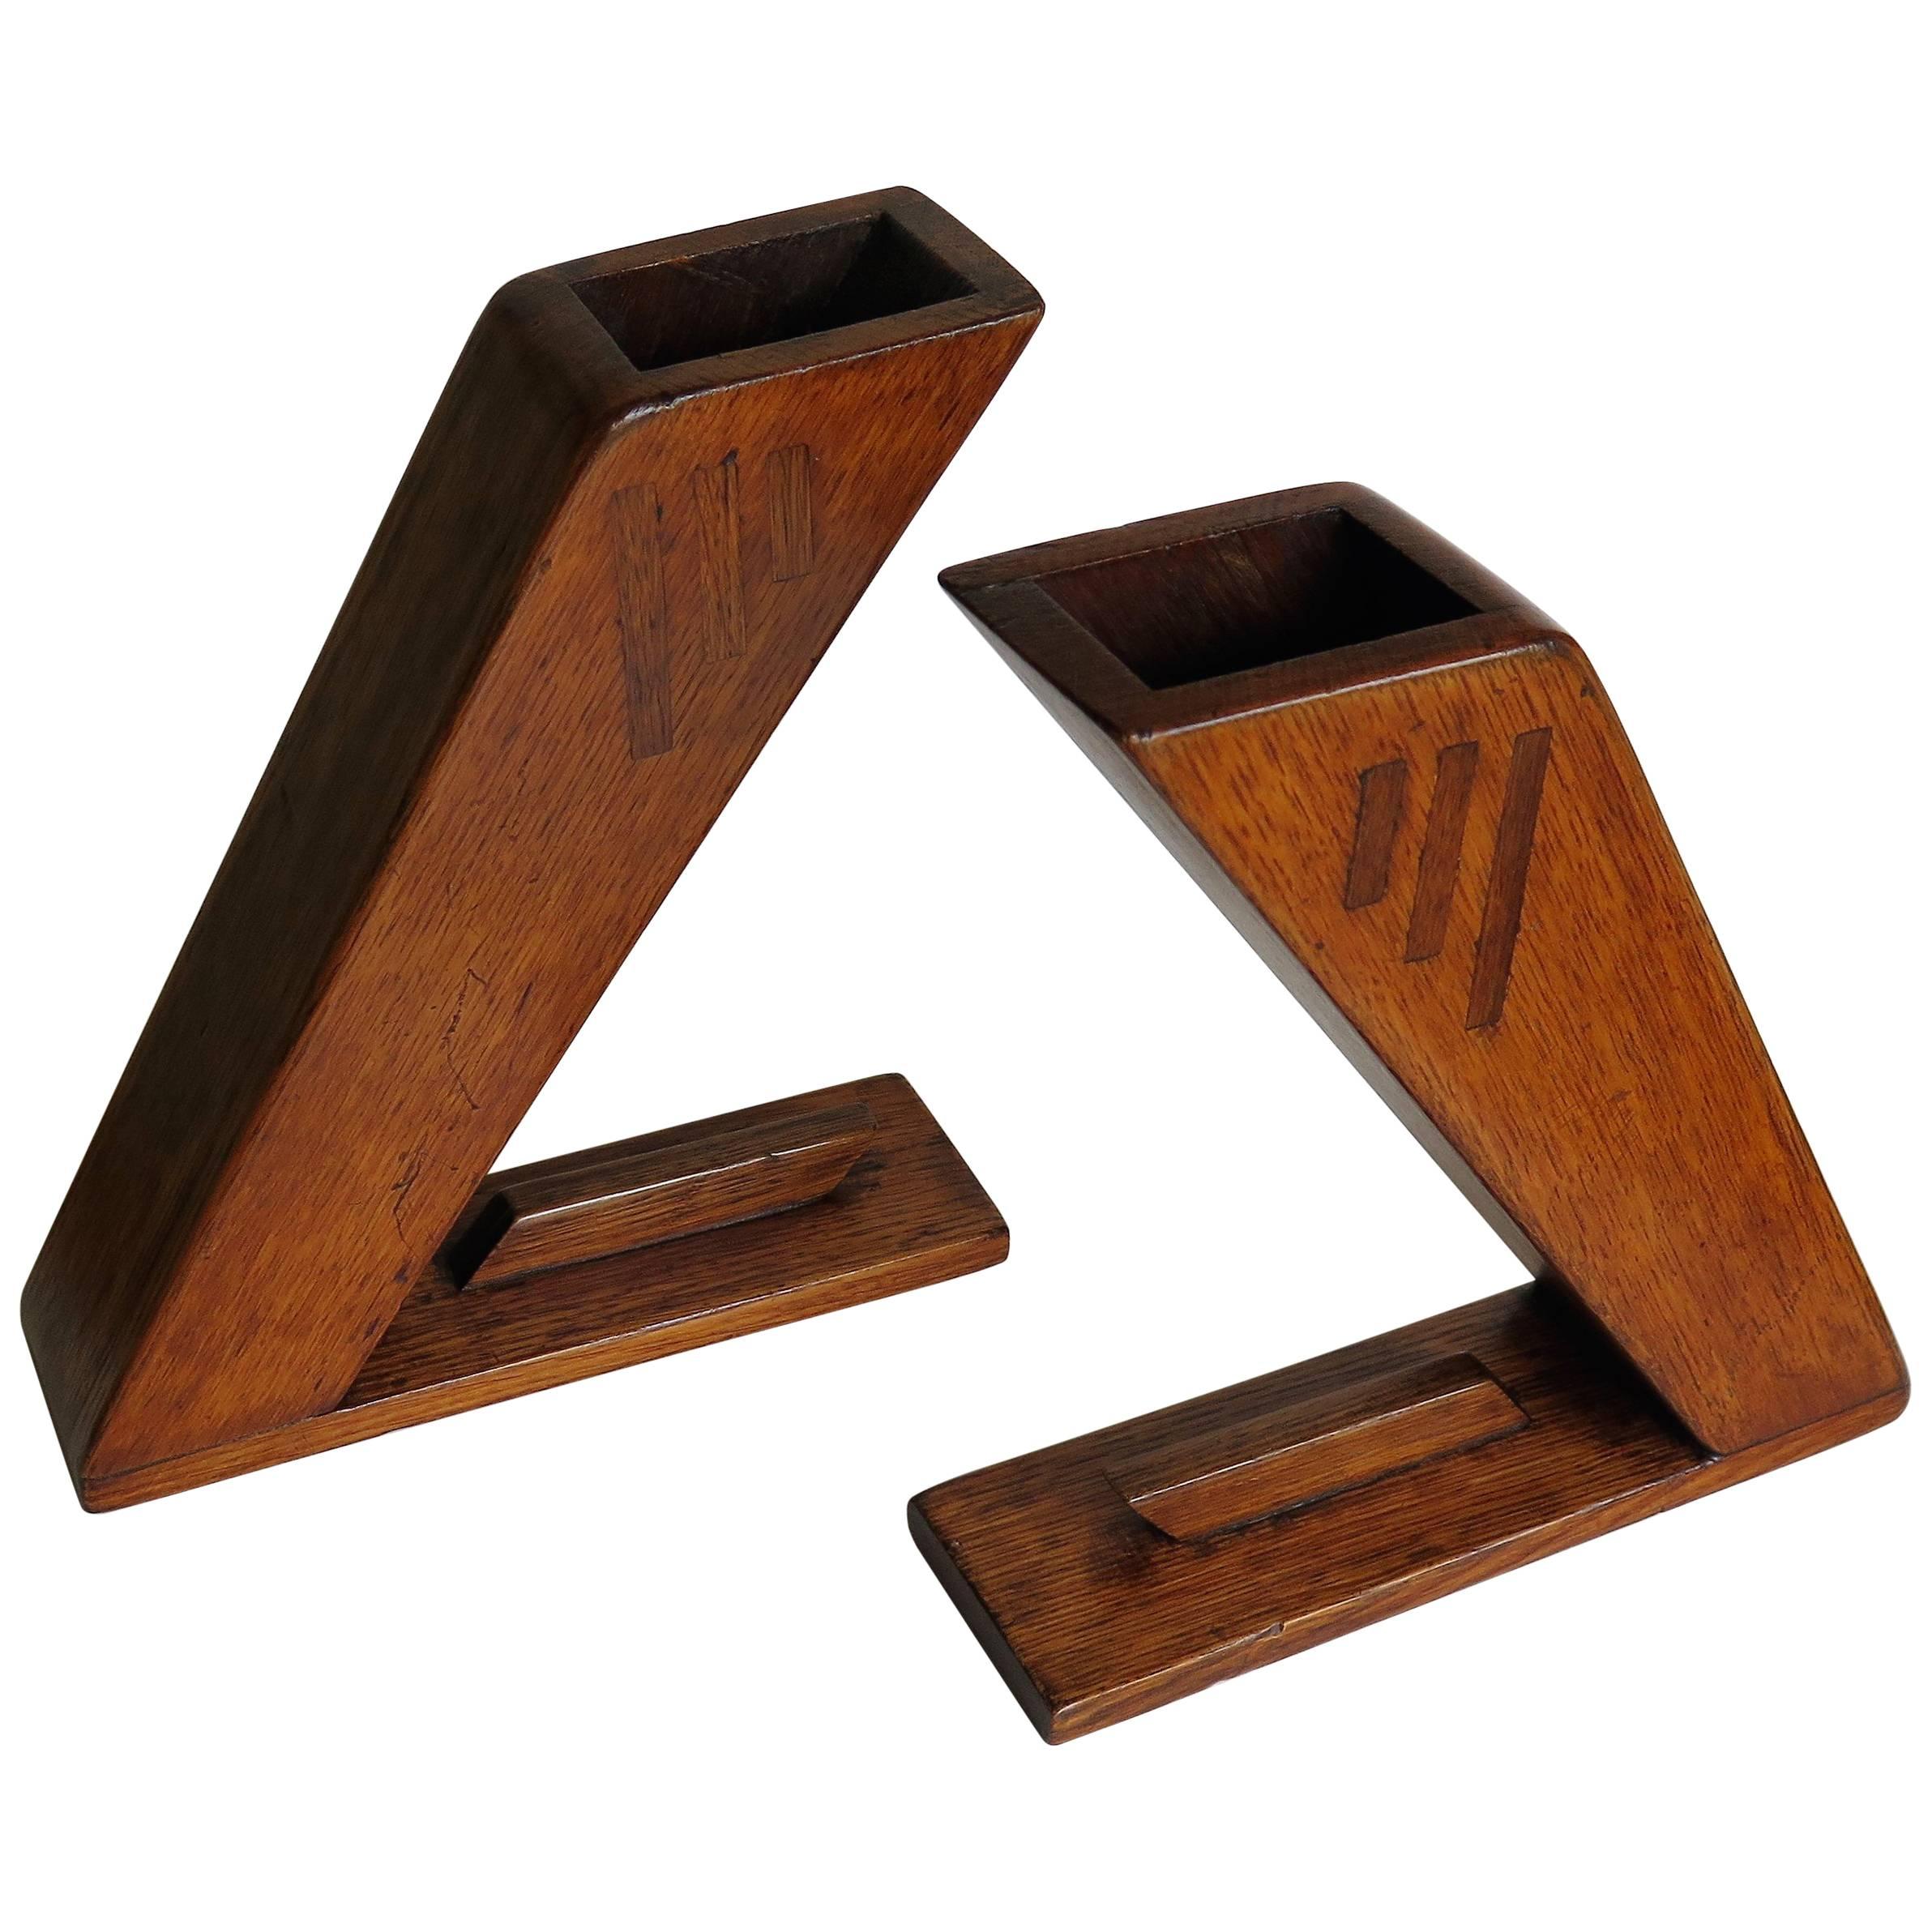 PAIR of Arts and Crafts Vases or Bookends Inlaid Oak, Circa 1890